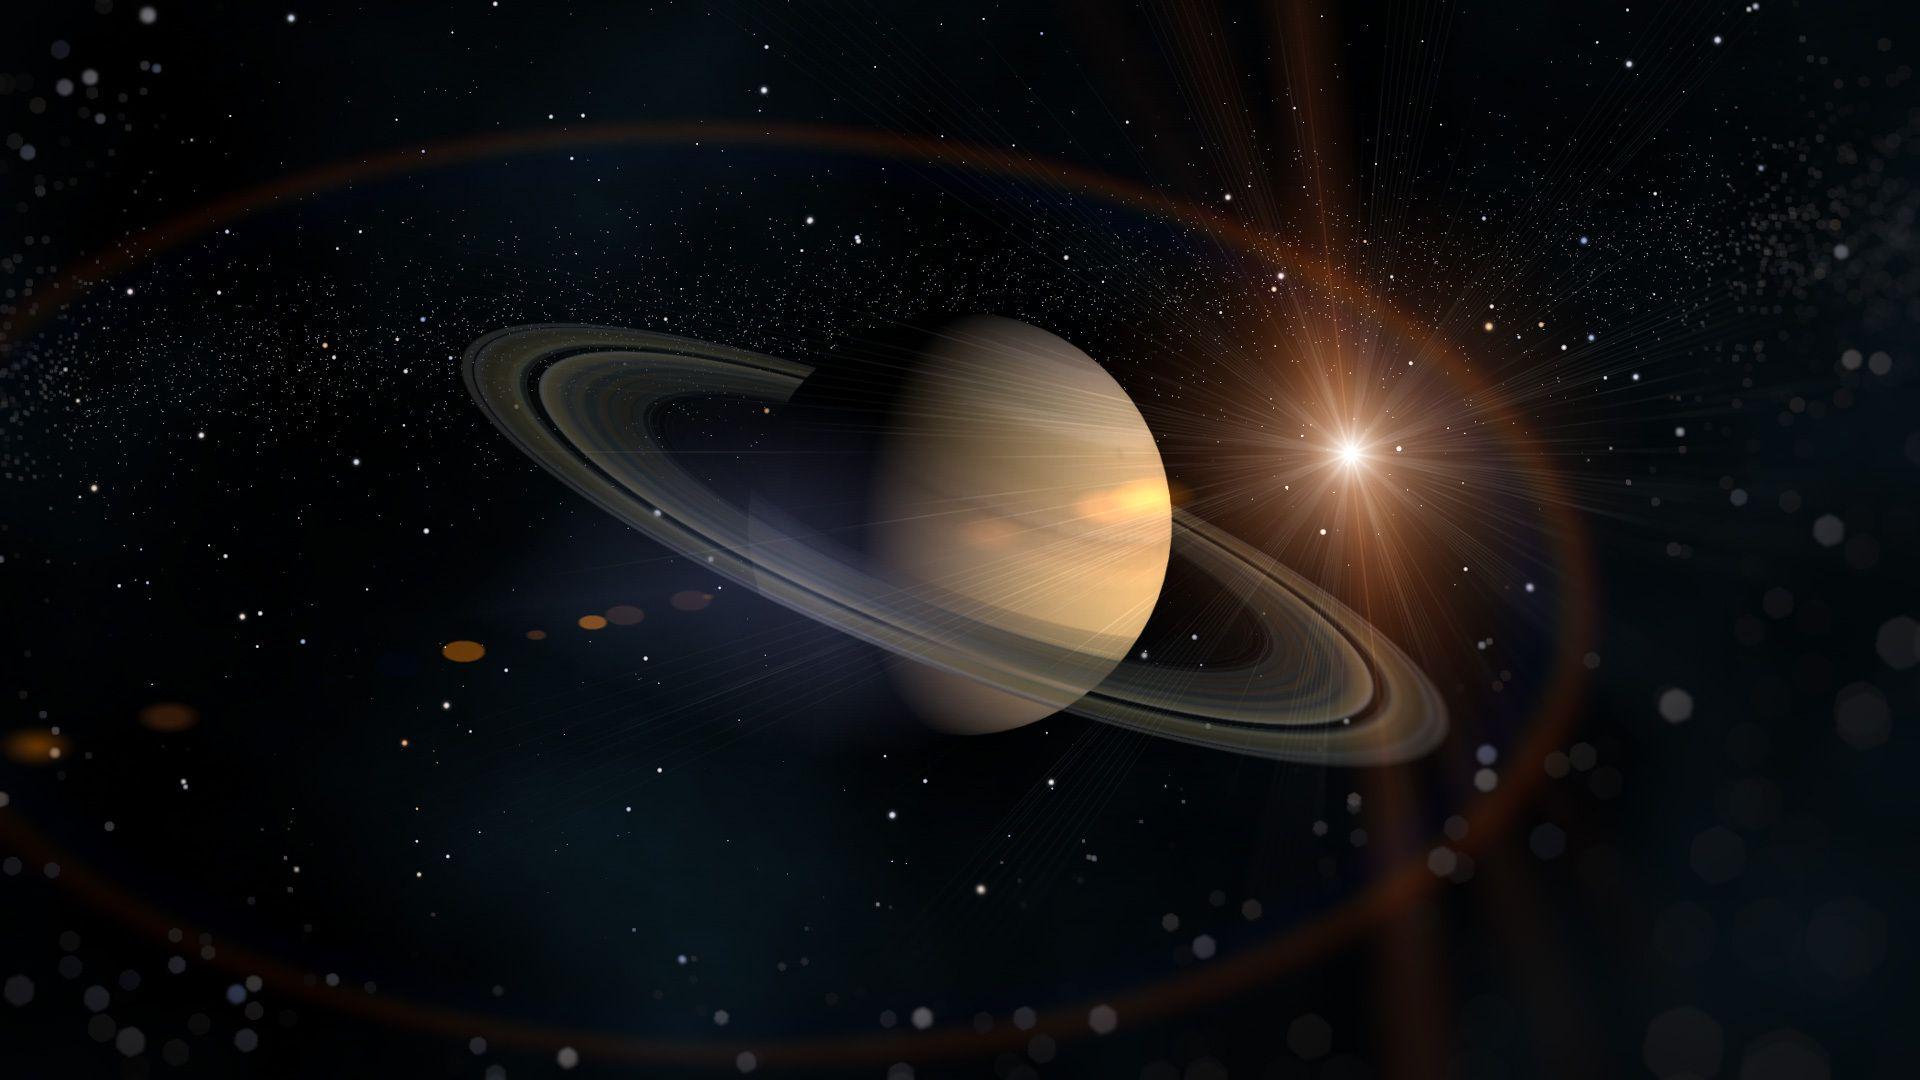 Saturn Planet Wallpapers Top Free Saturn Planet Backgrounds Wallpaperaccess 2297